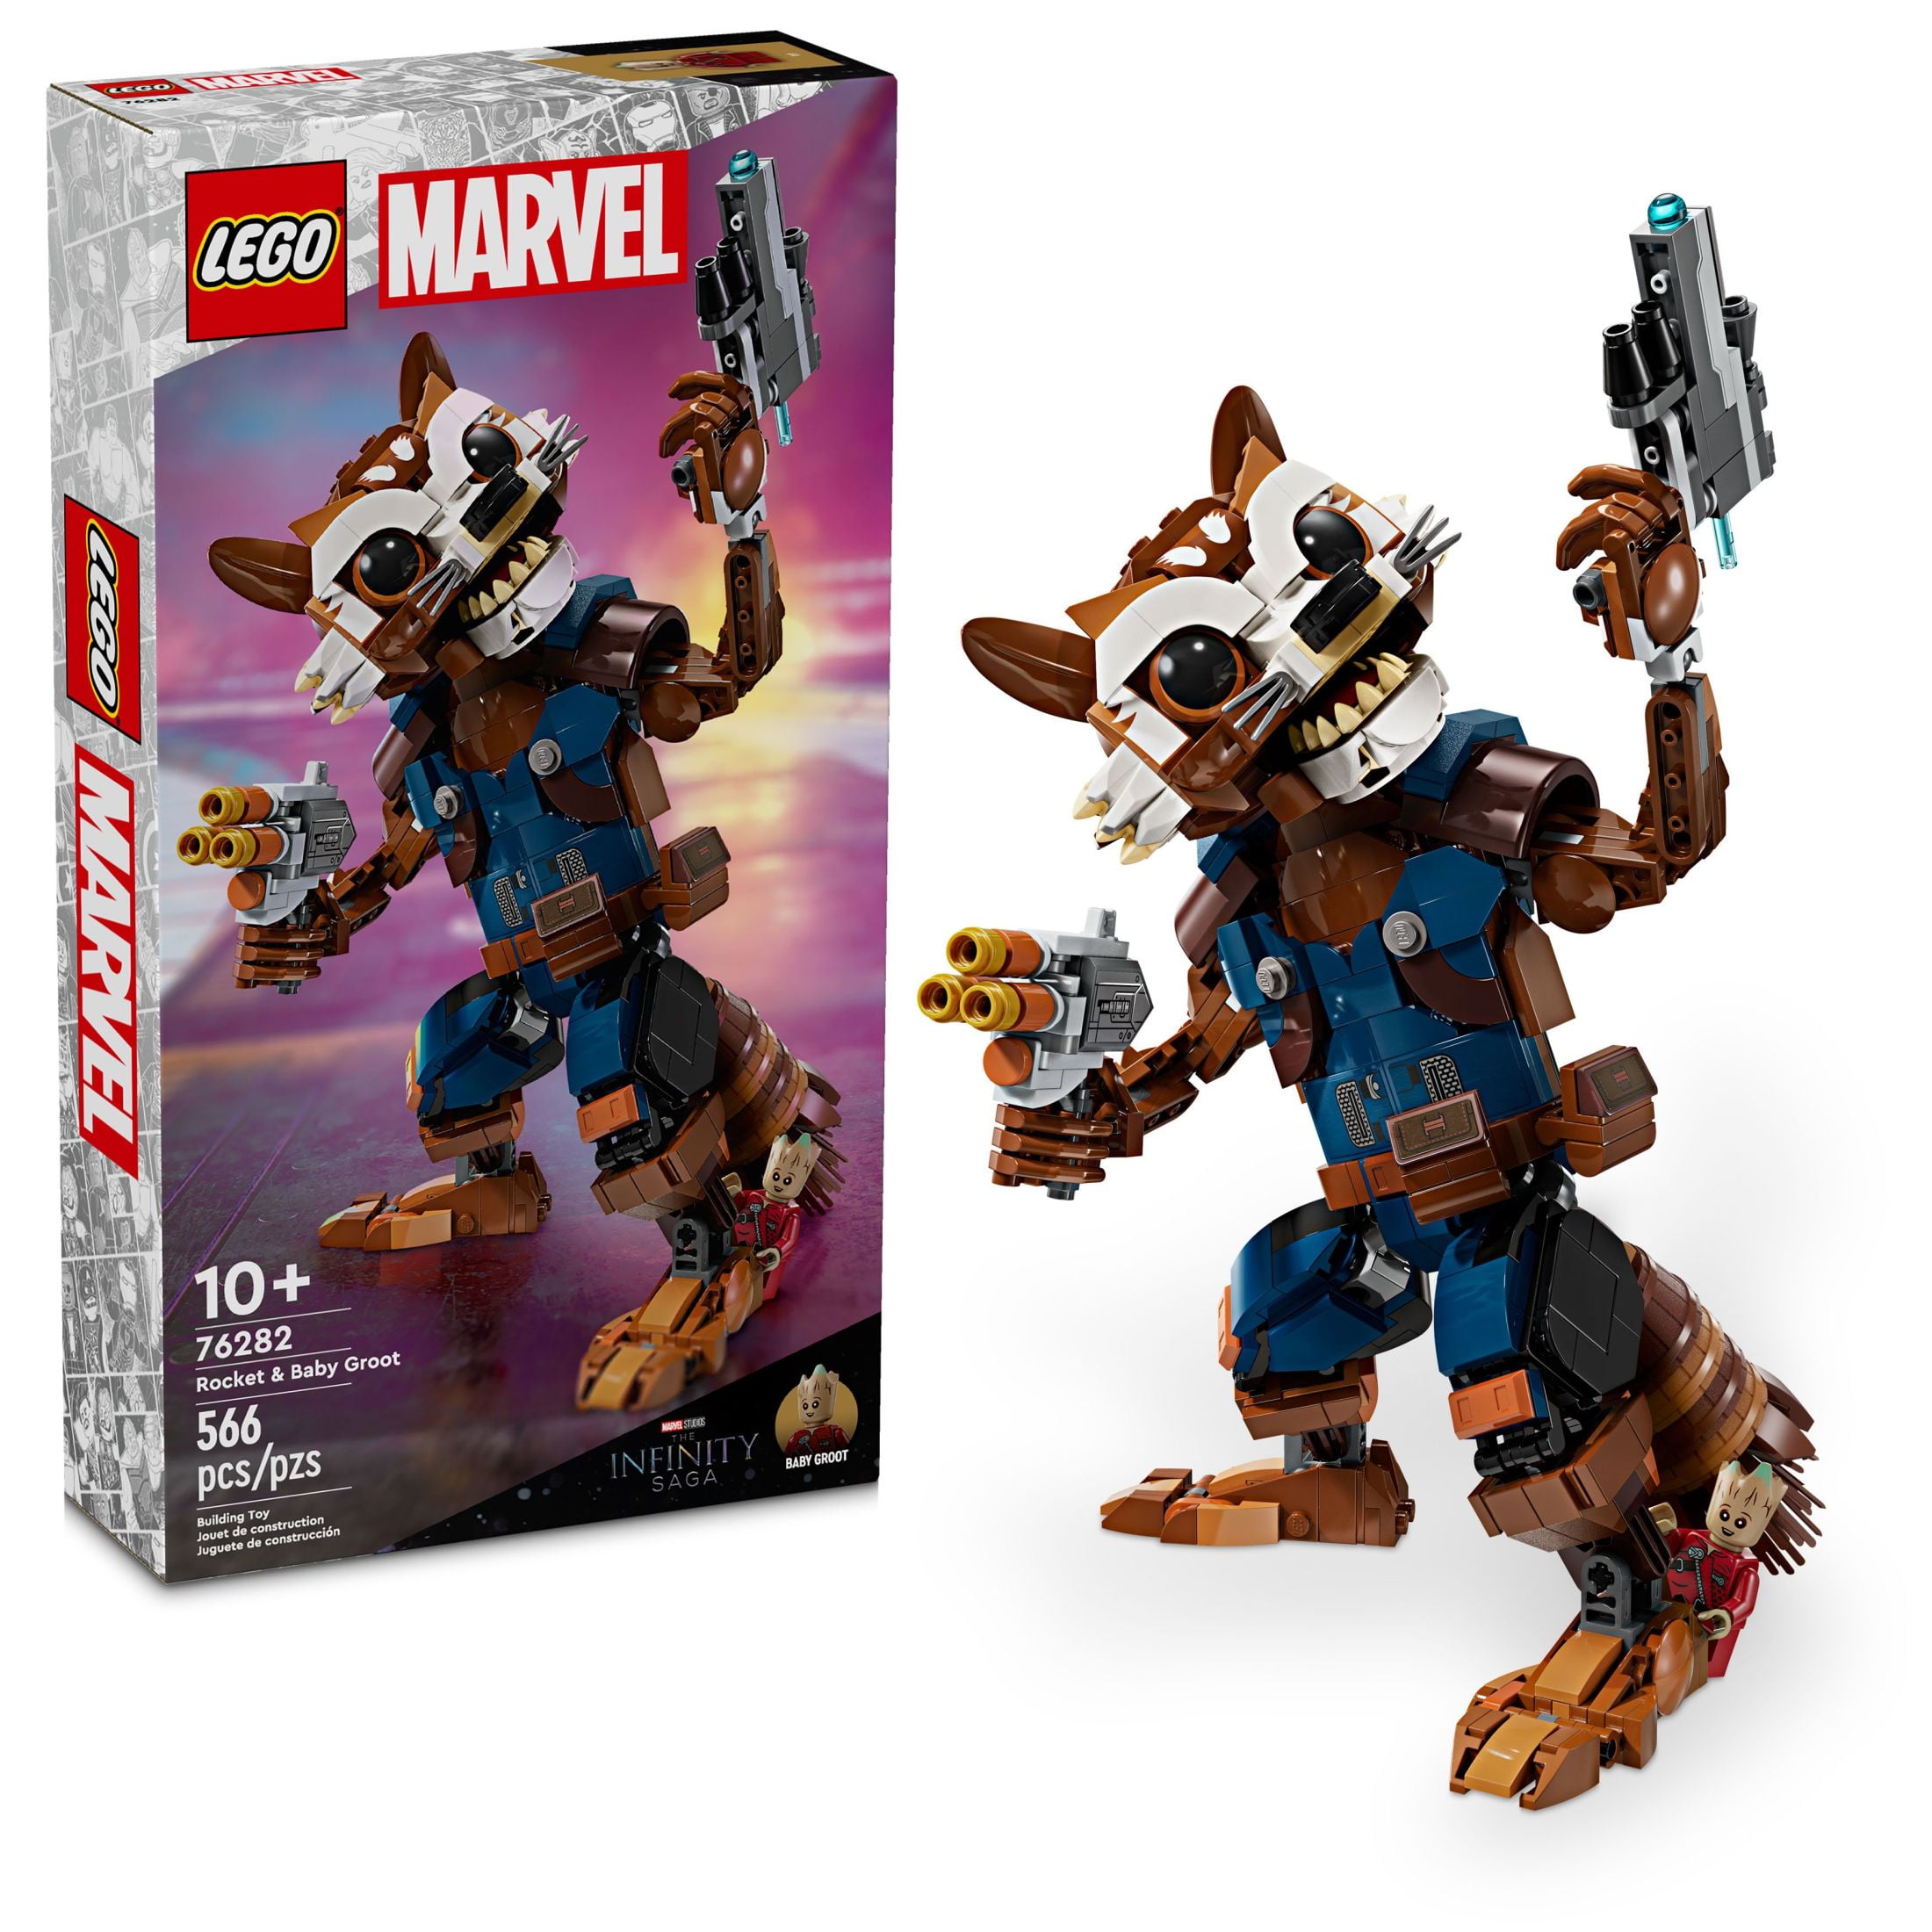 LEGO Marvel Baby Rocket's Ship 76254 Buildable Spaceship Toy from Guardians  of the Galaxy 3 Featuring Rocket Raccoon and Baby Rocket Minifigures,  Collectible Super Hero Toy Gift for Kids Ages 8 and